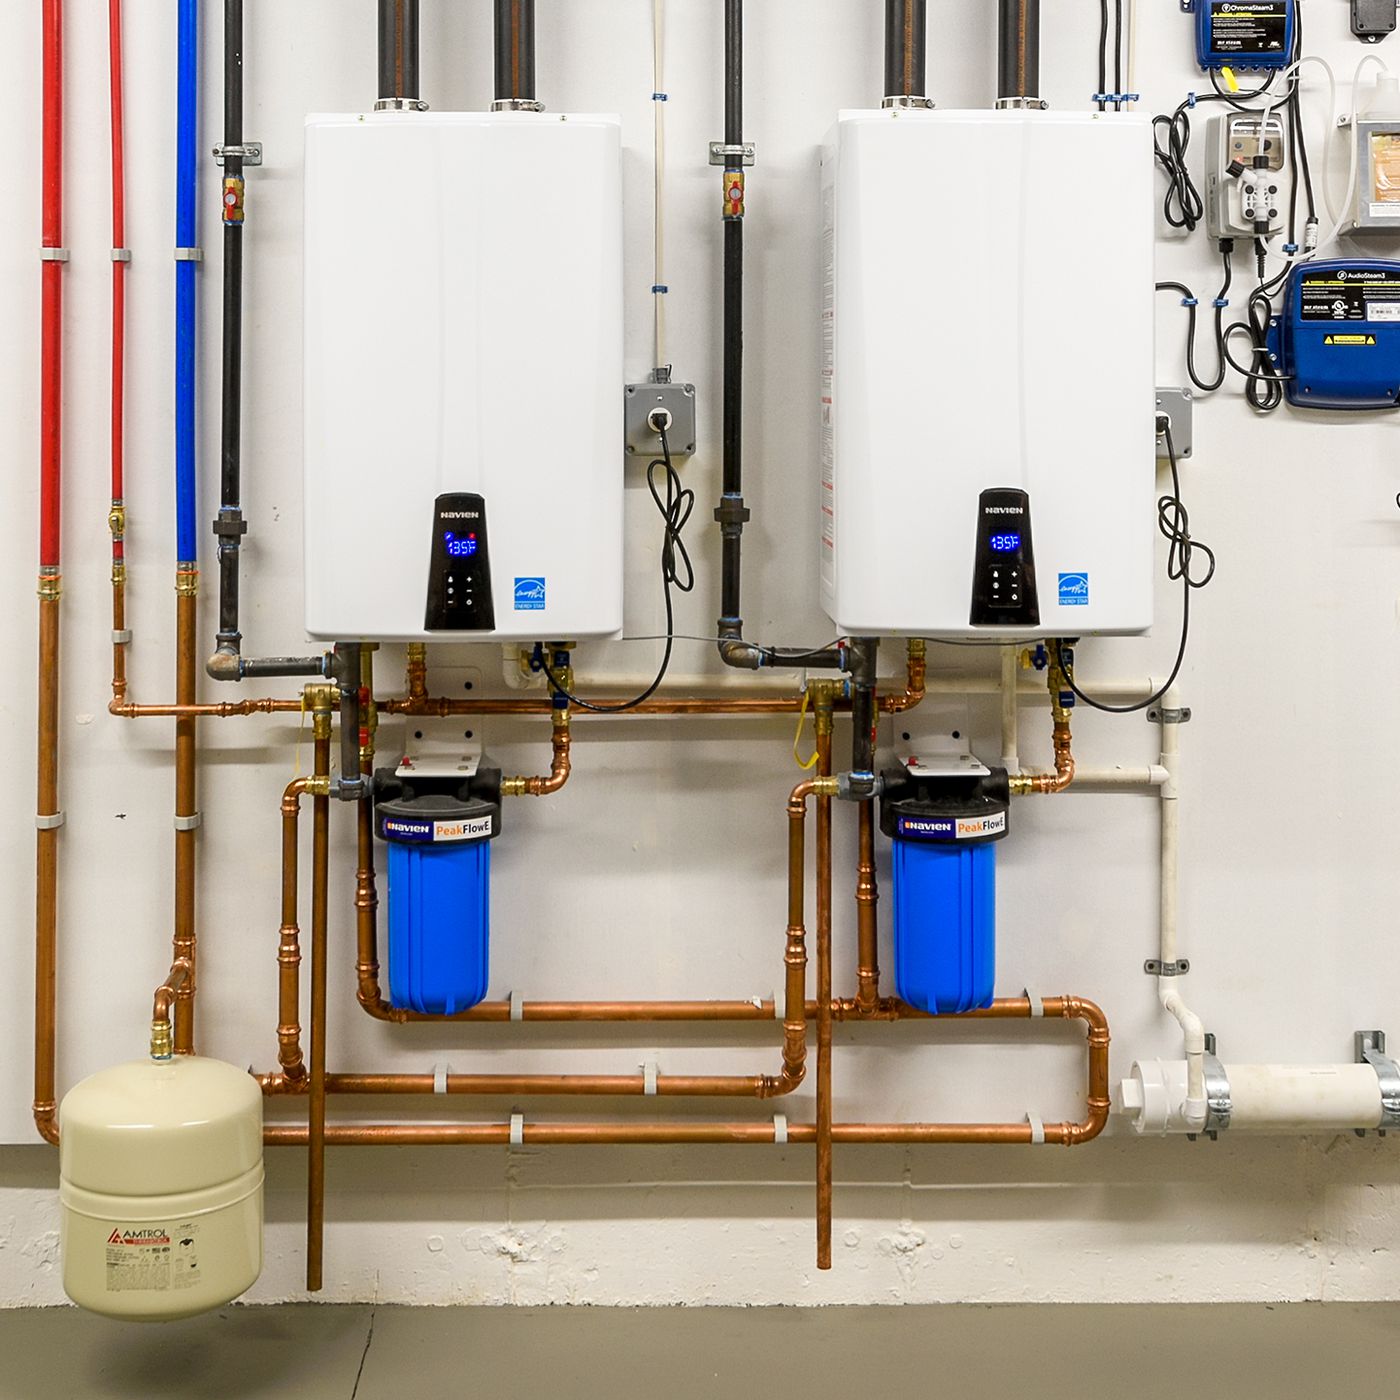 7 Tips In Choosing An Electric Water Heater For Hot Water Needs -  Mobilintec.Net